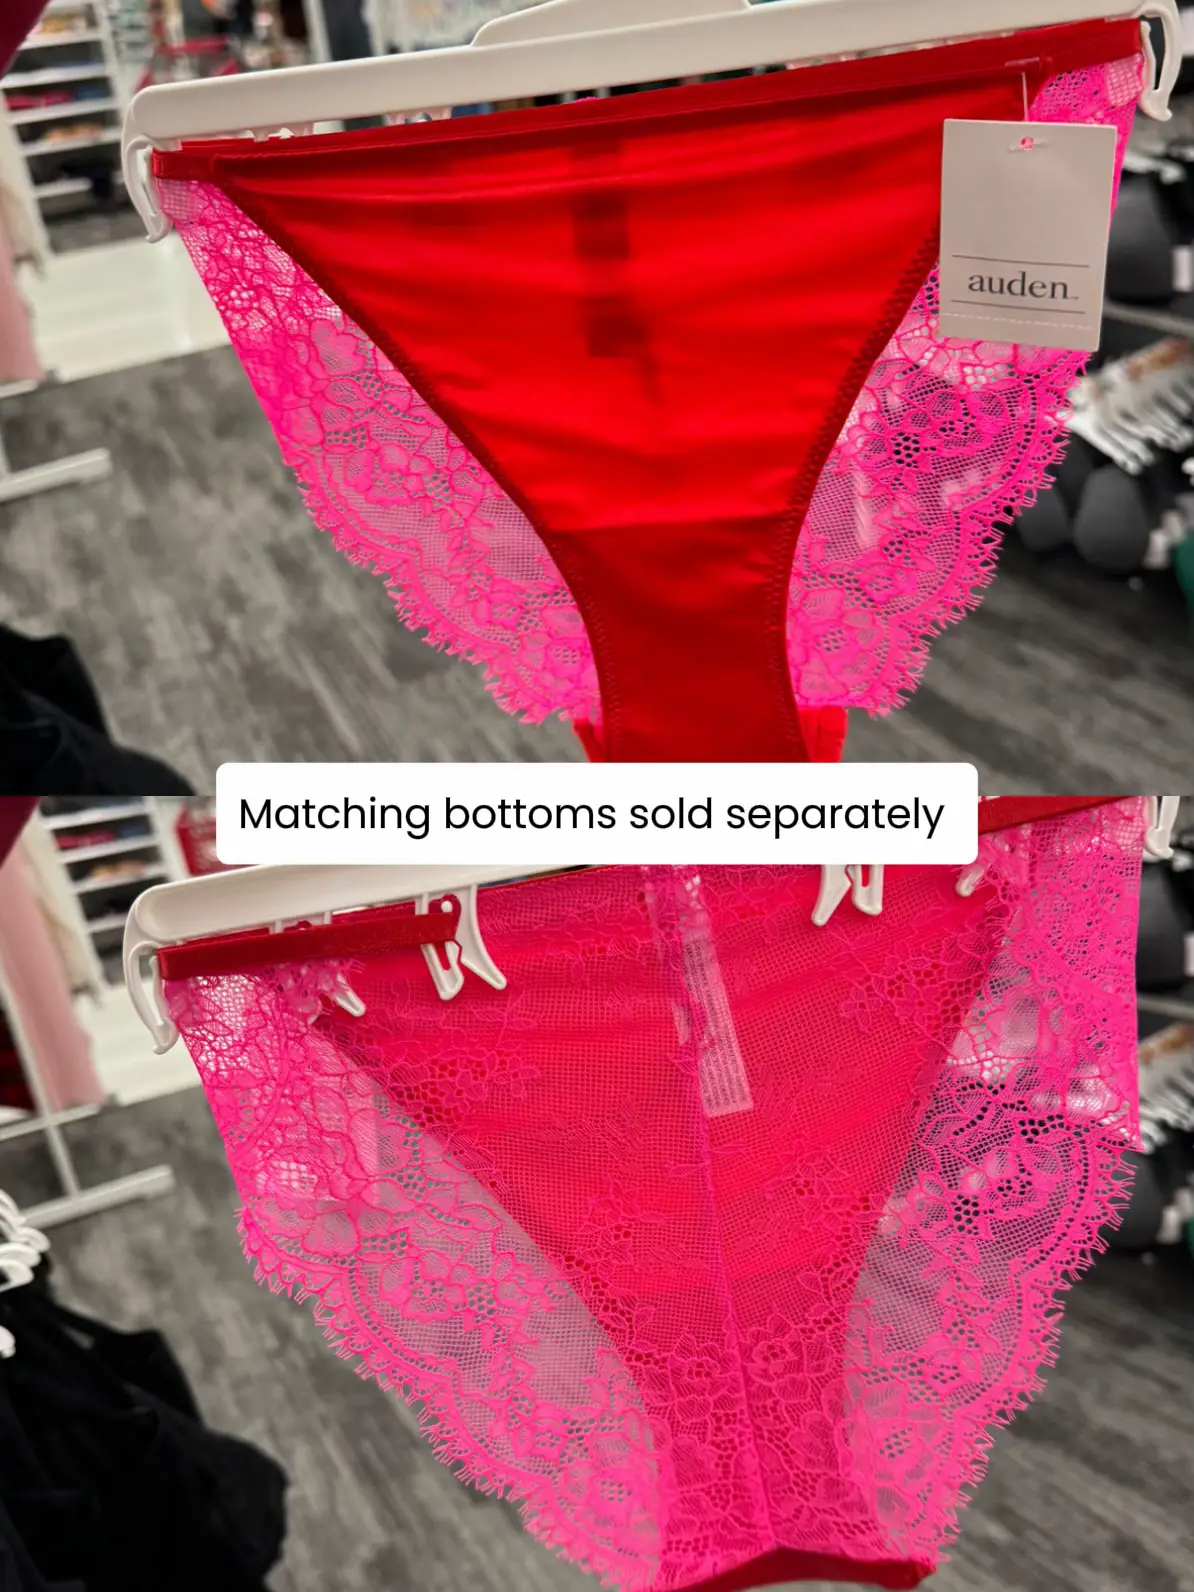 Skims Lingerie Dupe at Target, Gallery posted by Lexirosenstein